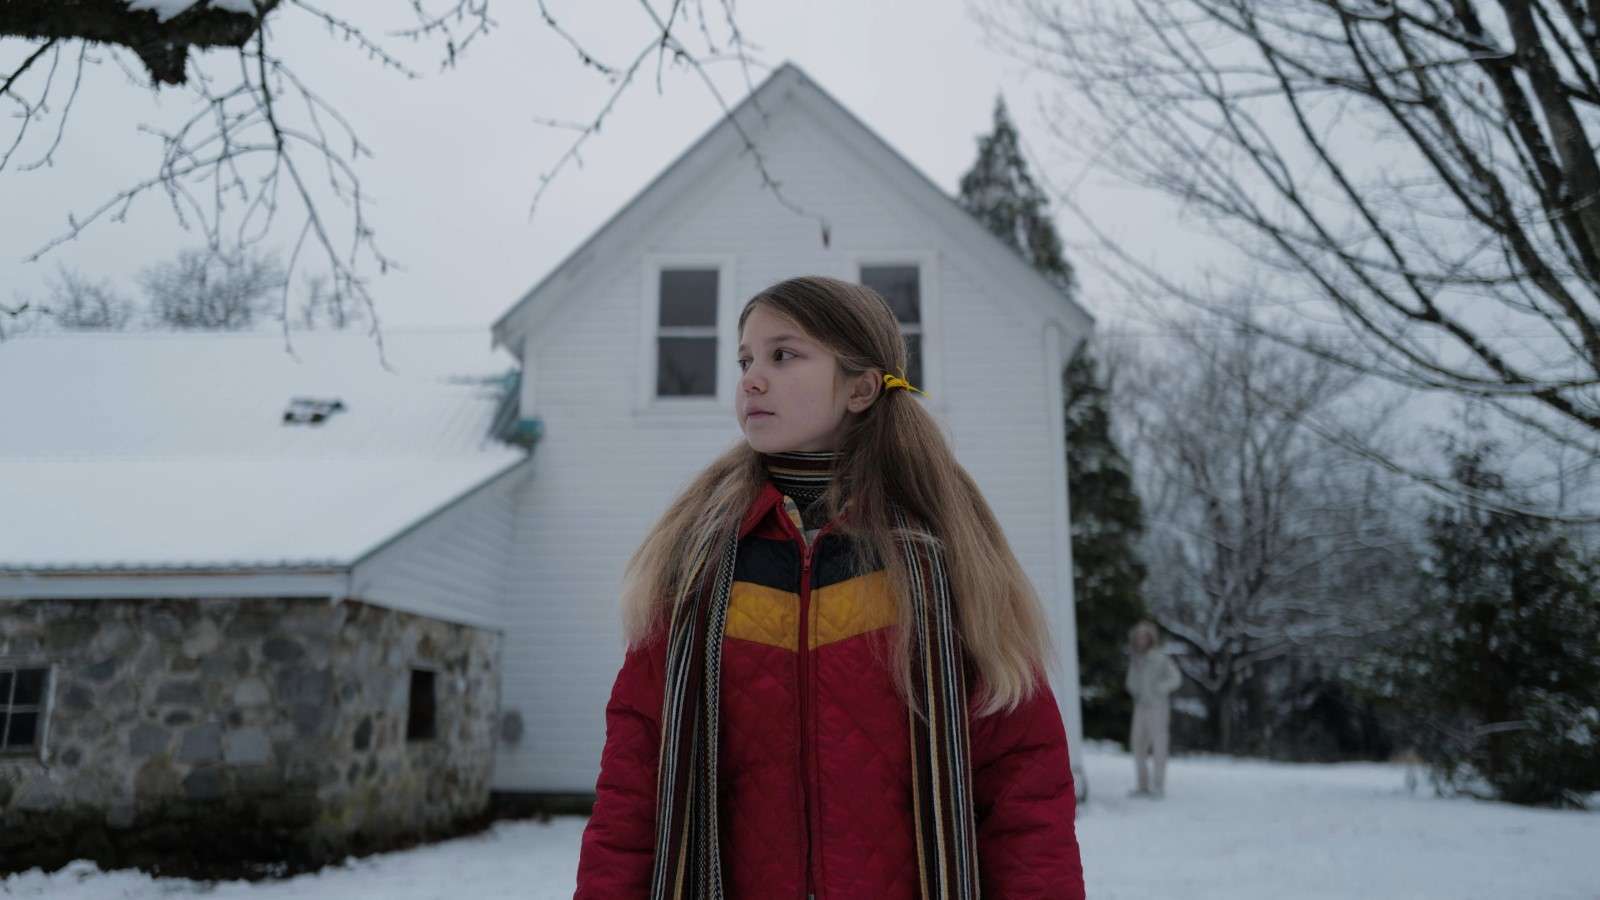 A still from the Longlegs trailer showing a girl standing outside a snow-covered house